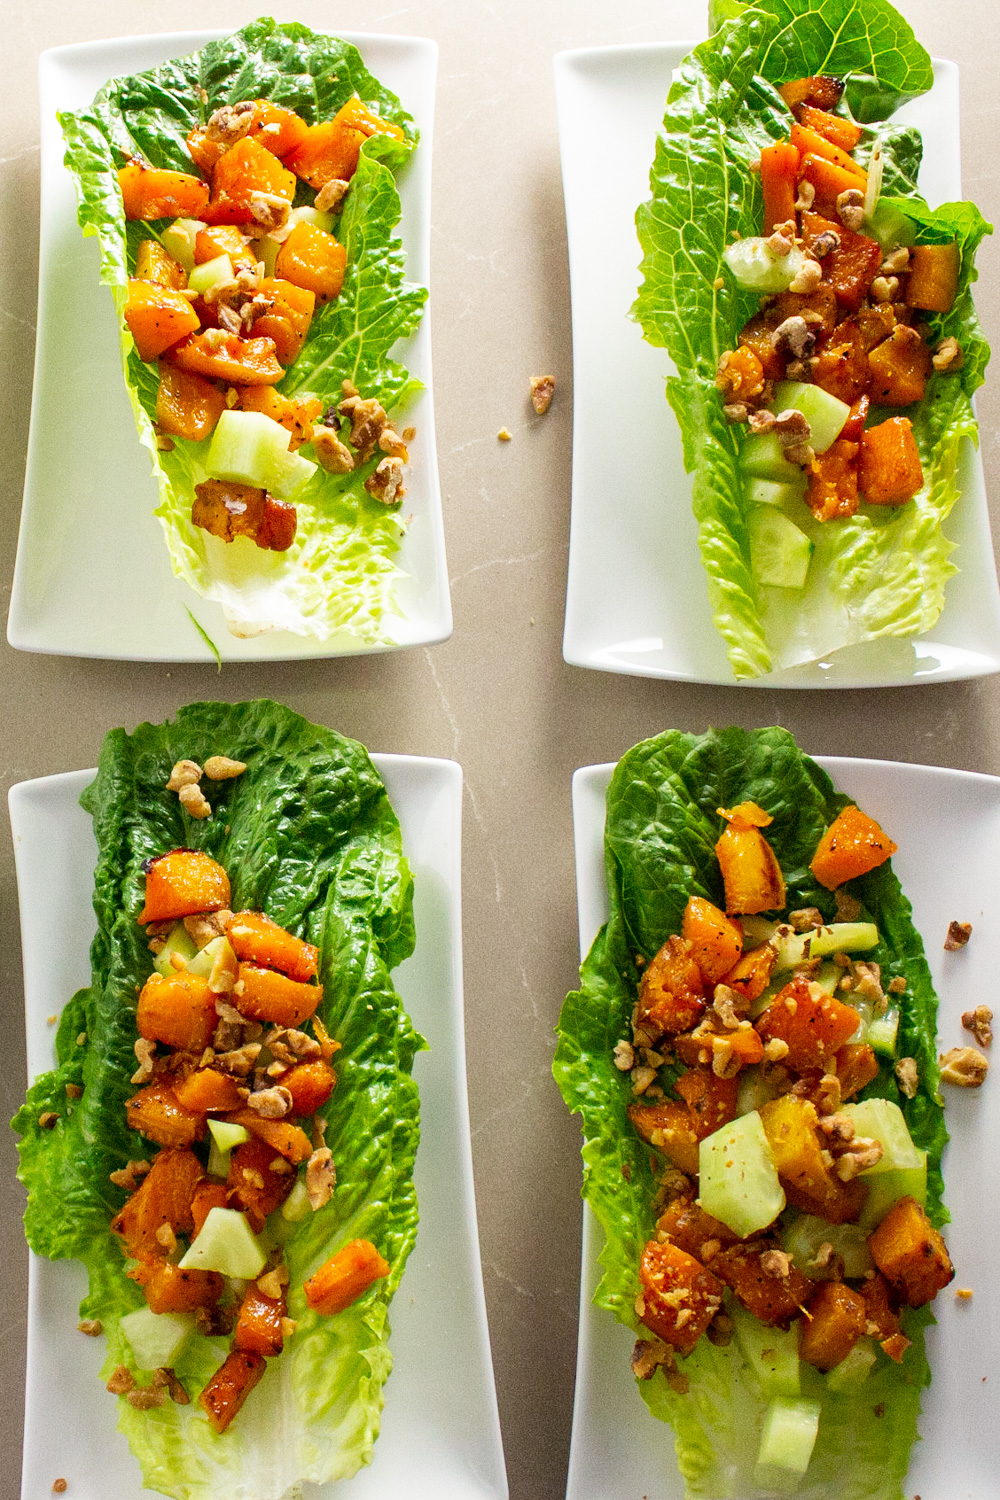 6 plates of romaine lettuce leaves with roasted butternut squash salad on each leaf on white plates.